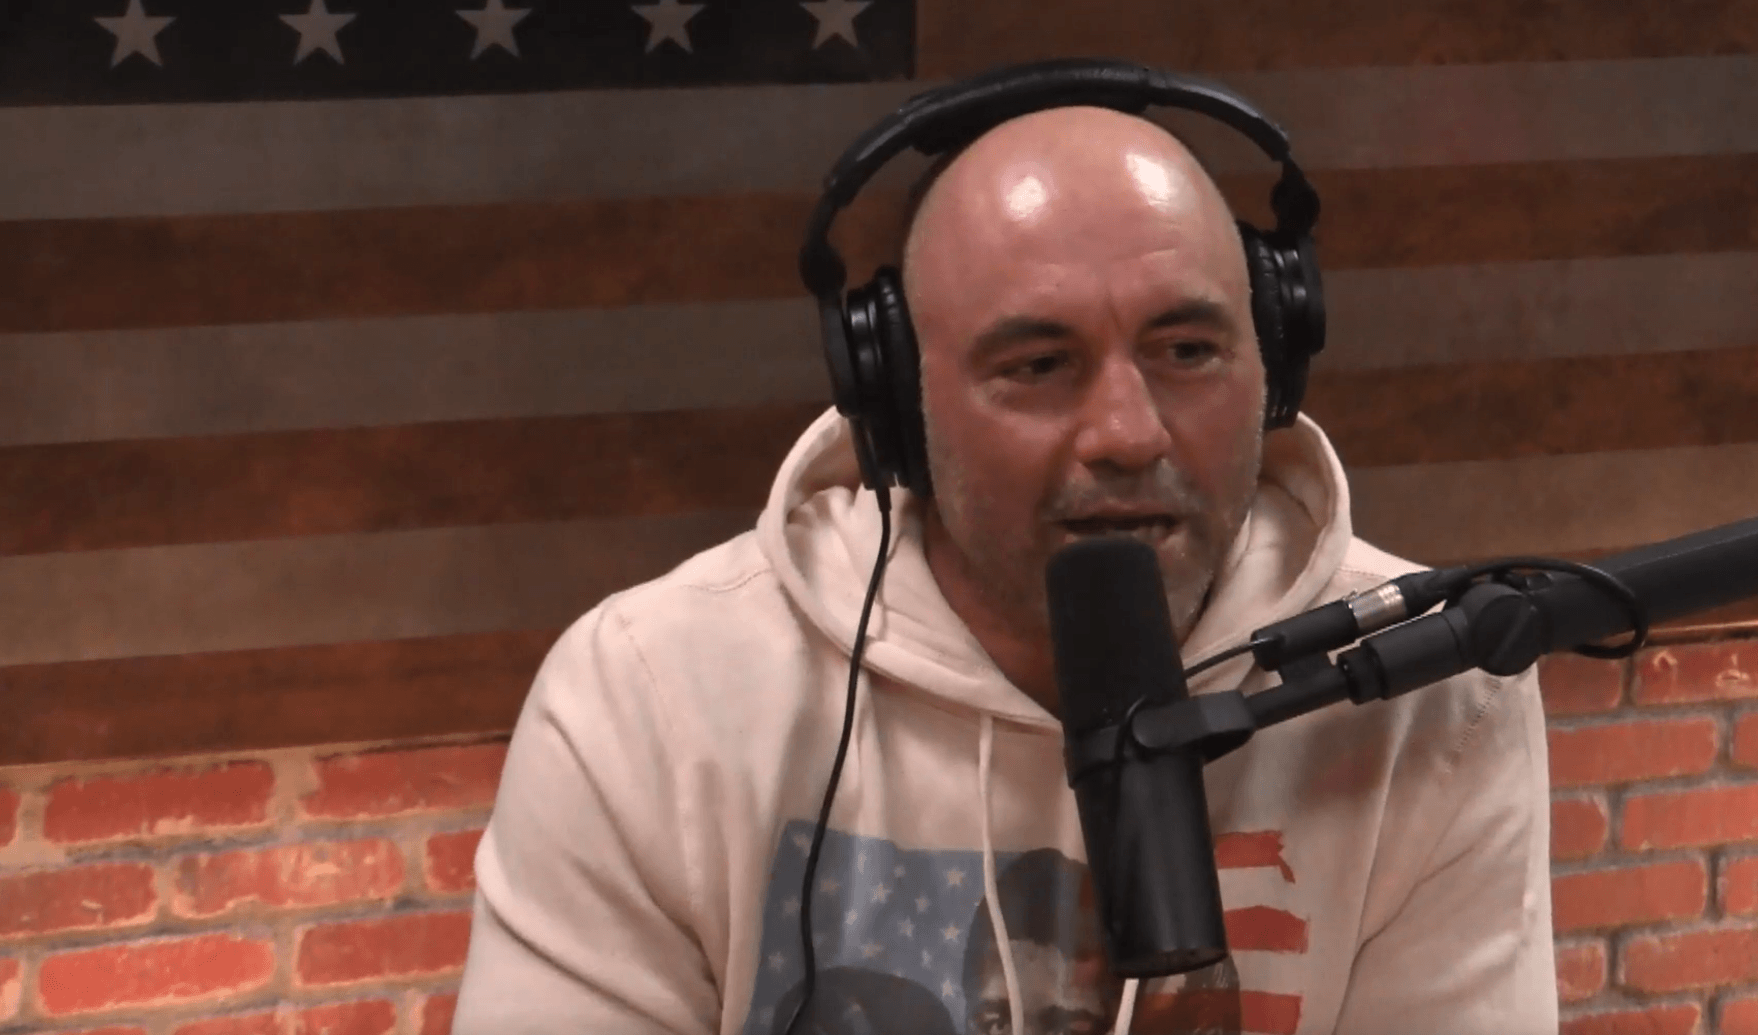 Joe Rogan’s Podcast Is Moving To Spotify Exclusively